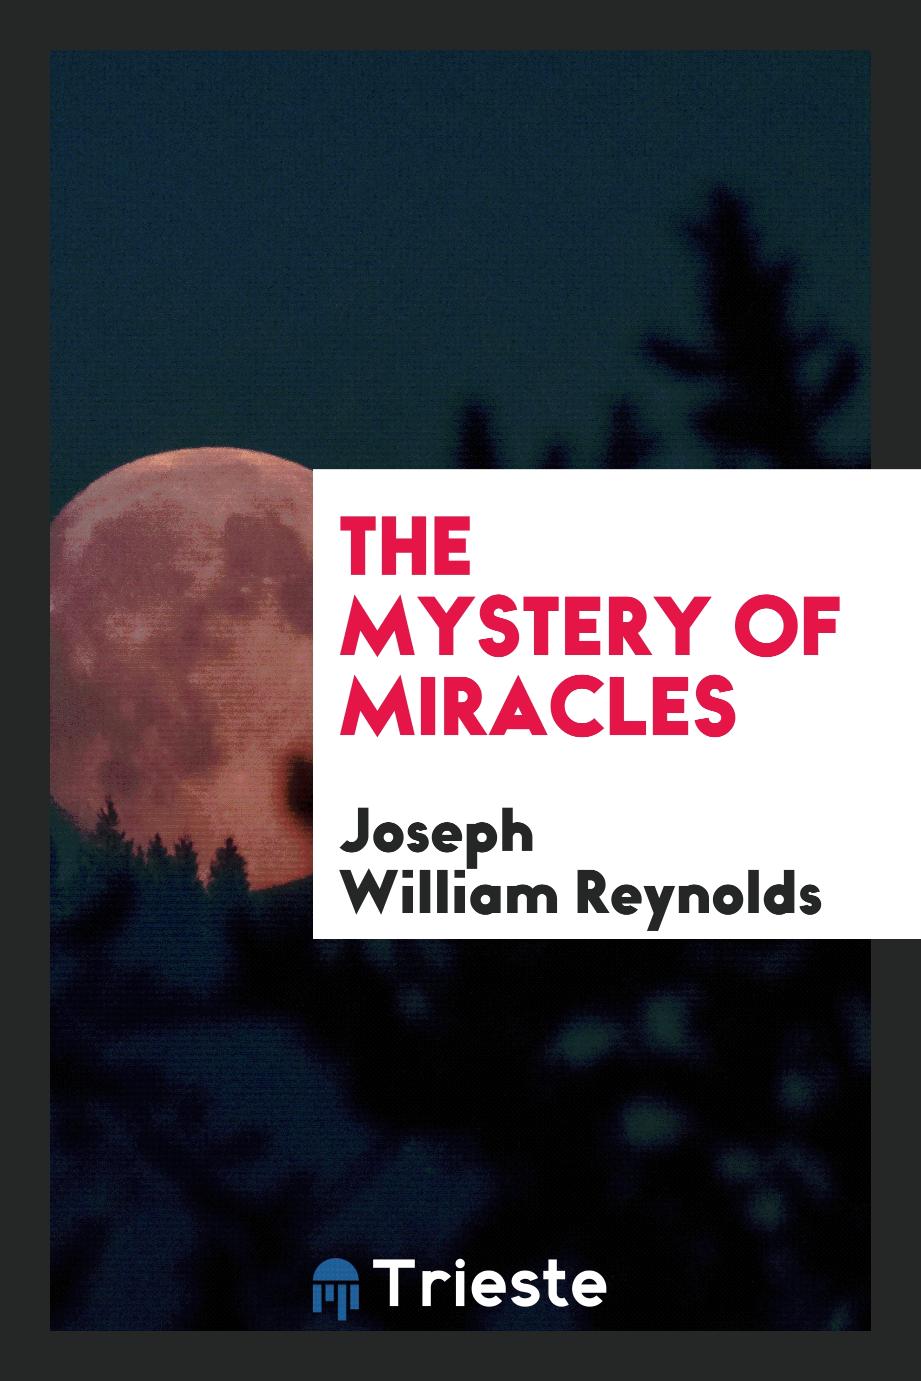 The mystery of miracles